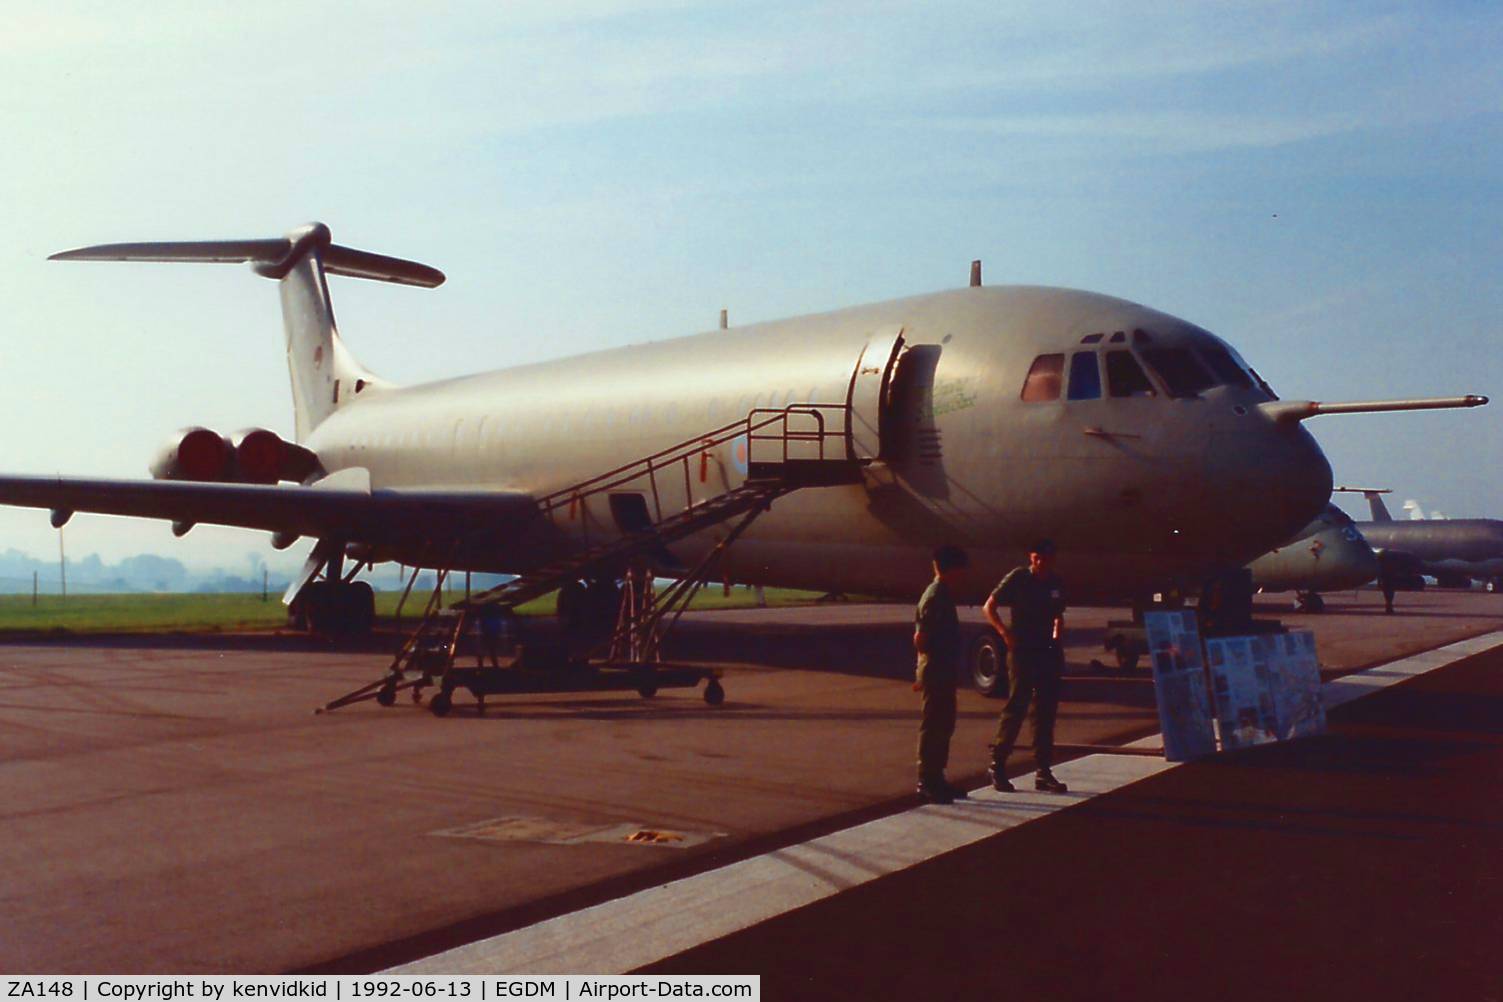 ZA148, 1967 Vickers VC10 K.3 C/N 883, At Boscombe Down, scanned from print.